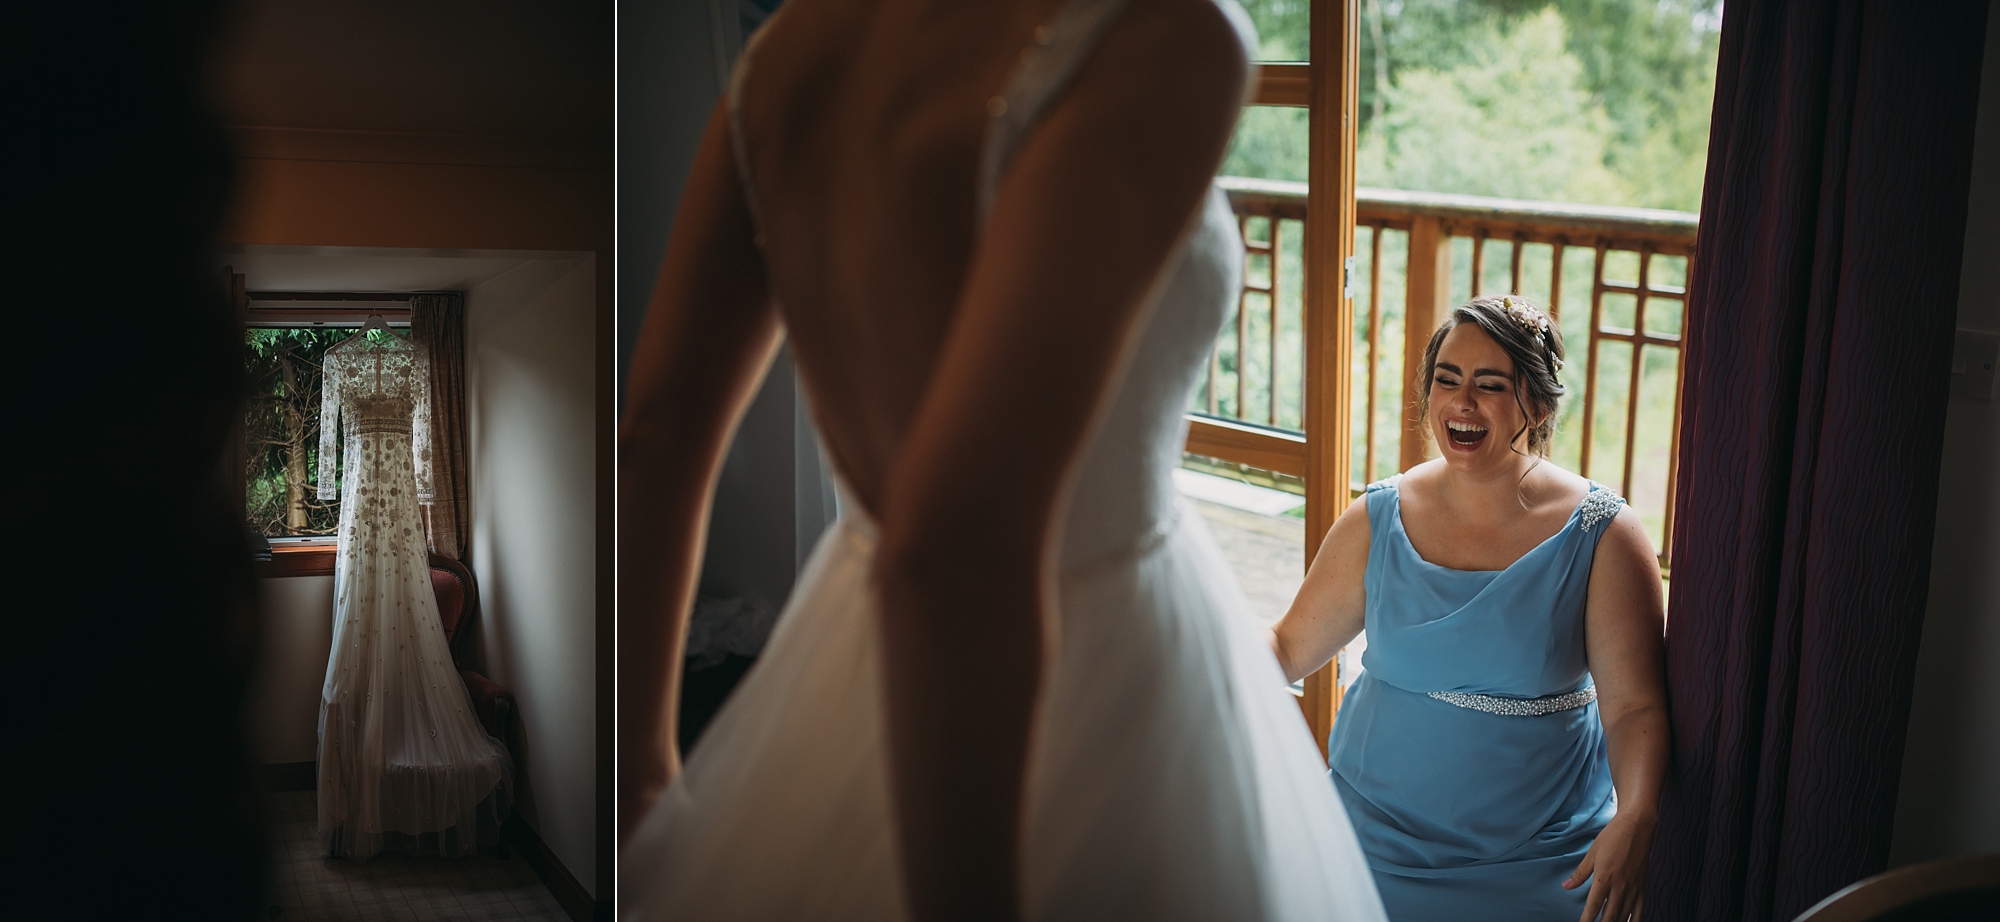 best wedding photographs of the dress and bride getting ready